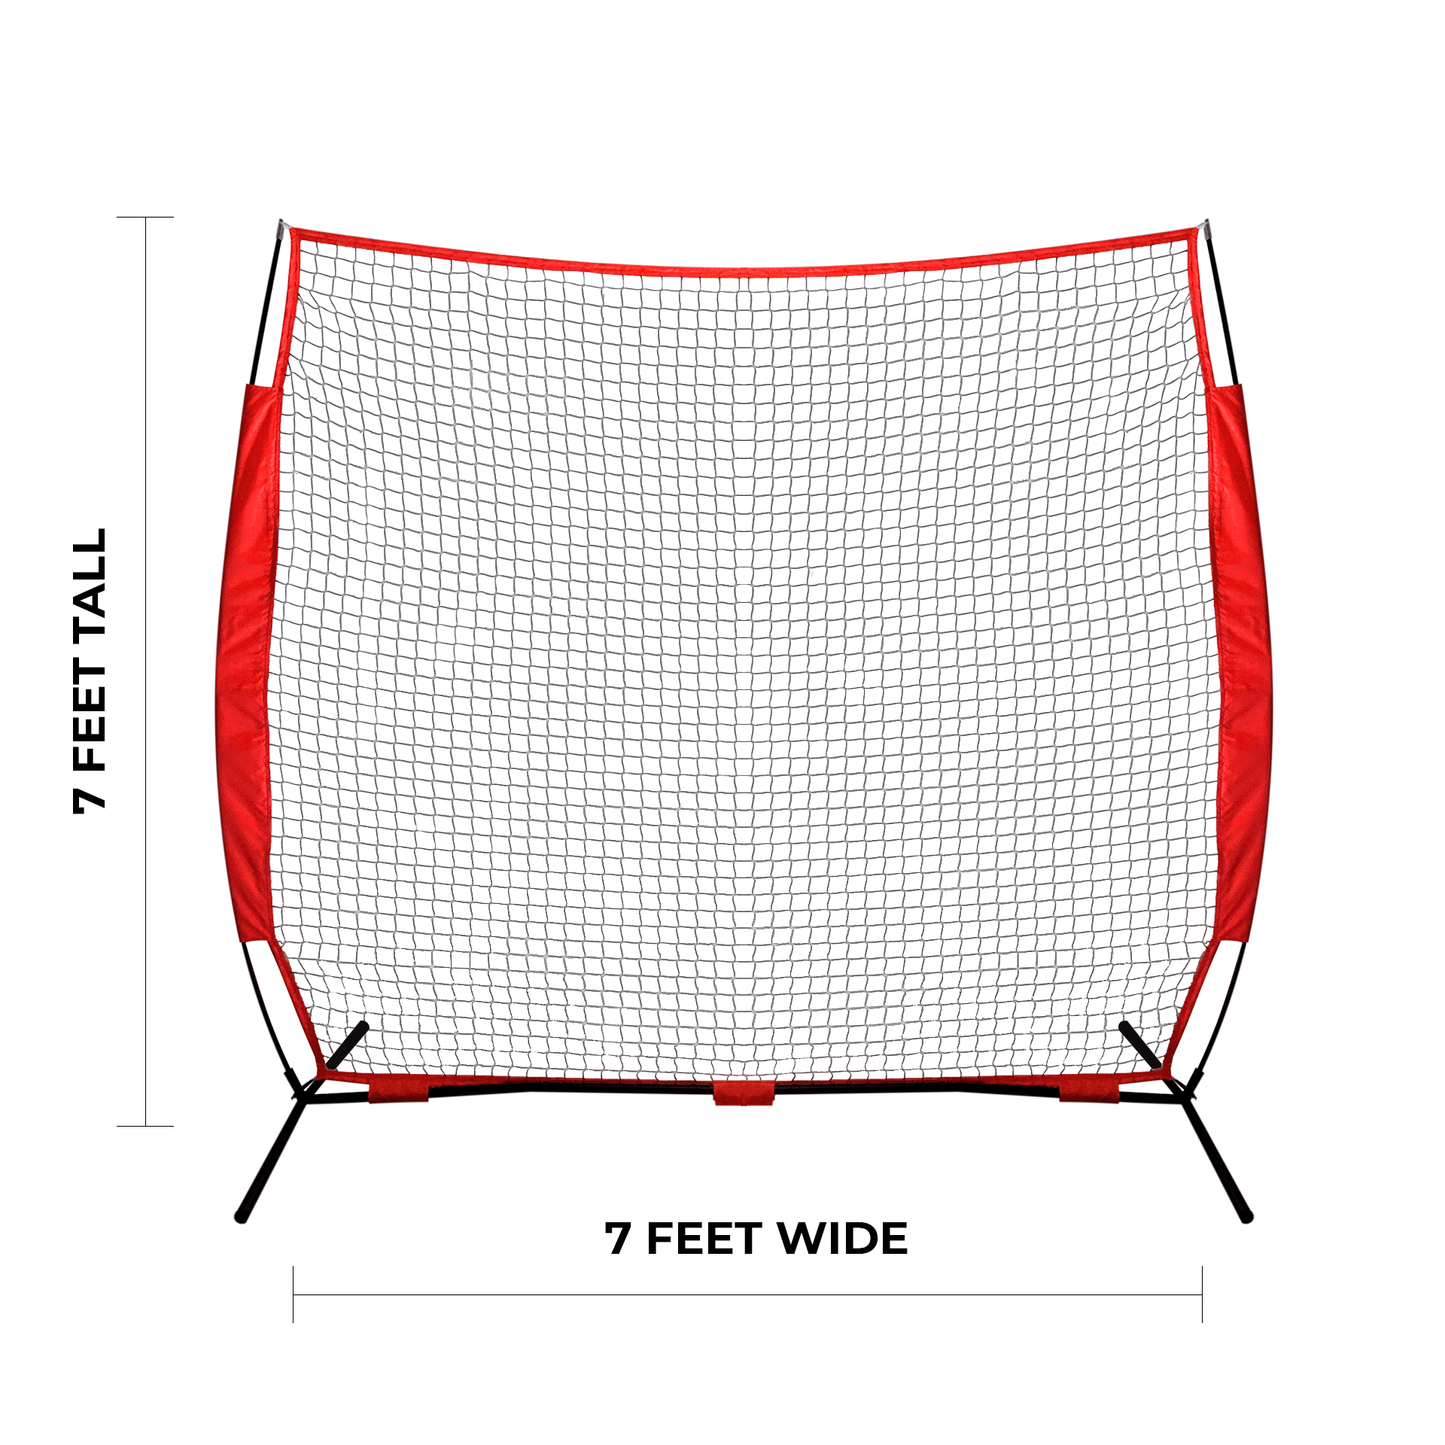 LARGE BACK NET FOR CATCHING ARROWS